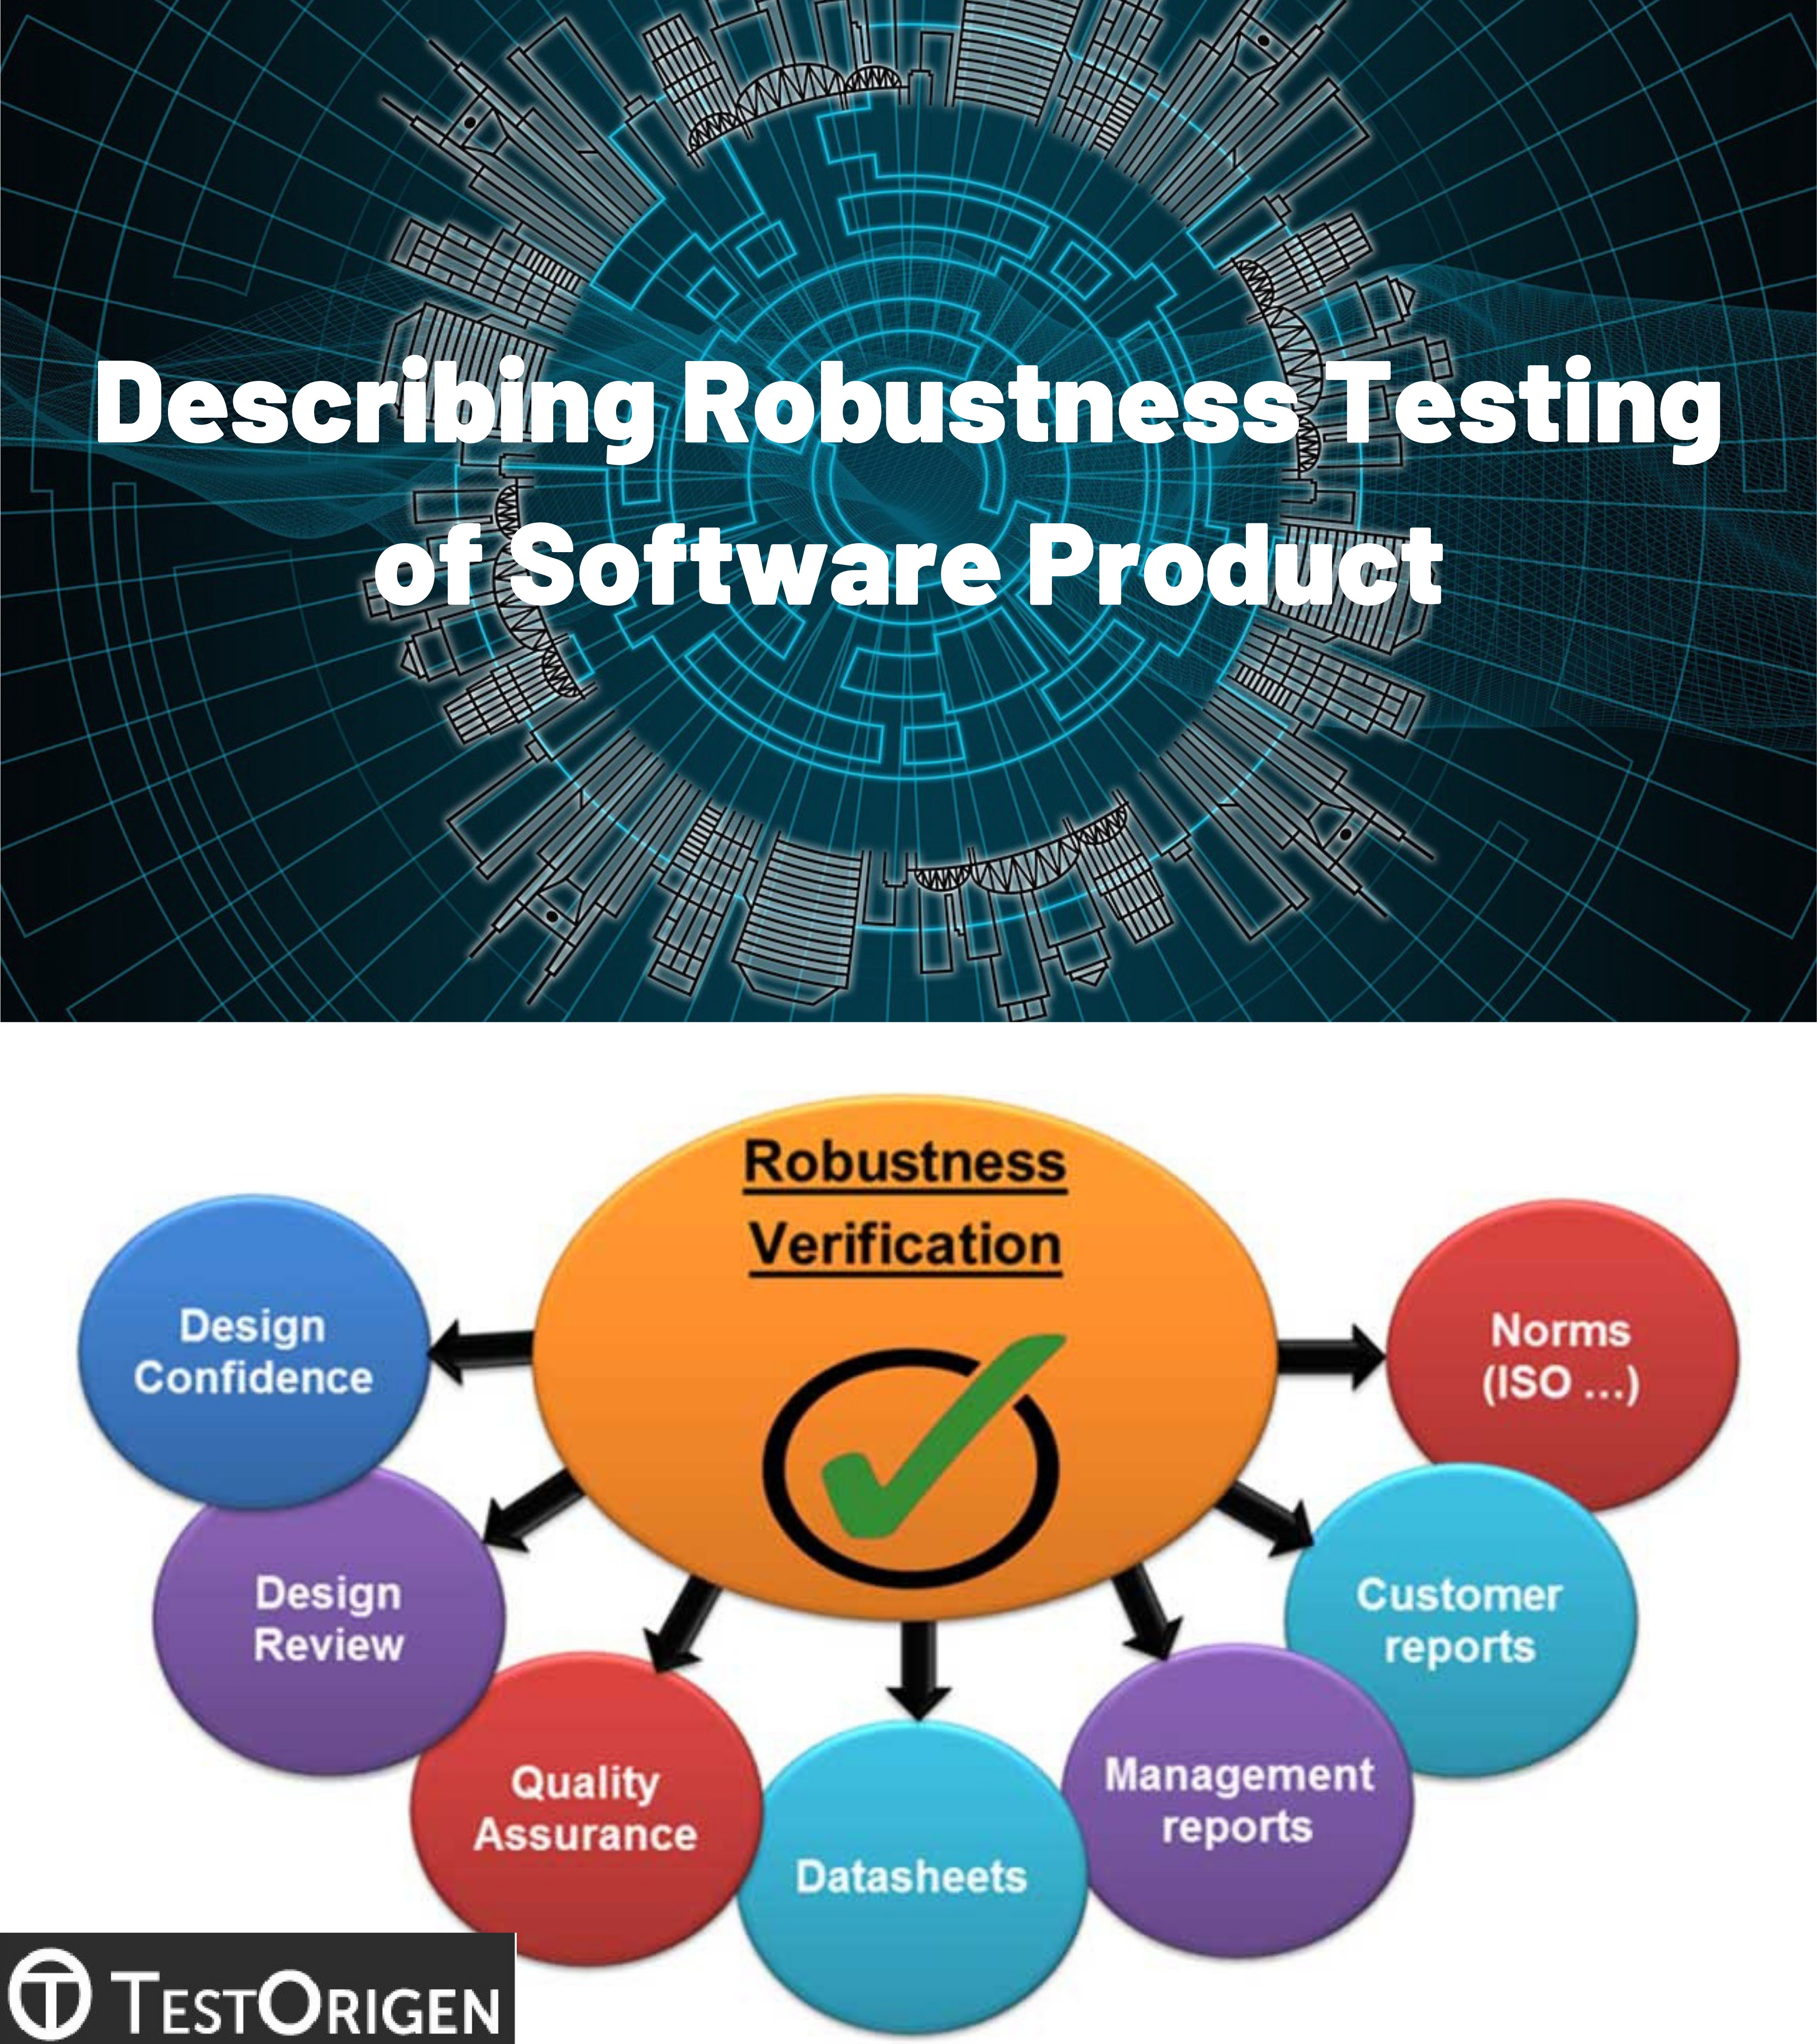 Describing Robustness Testing of Software Product